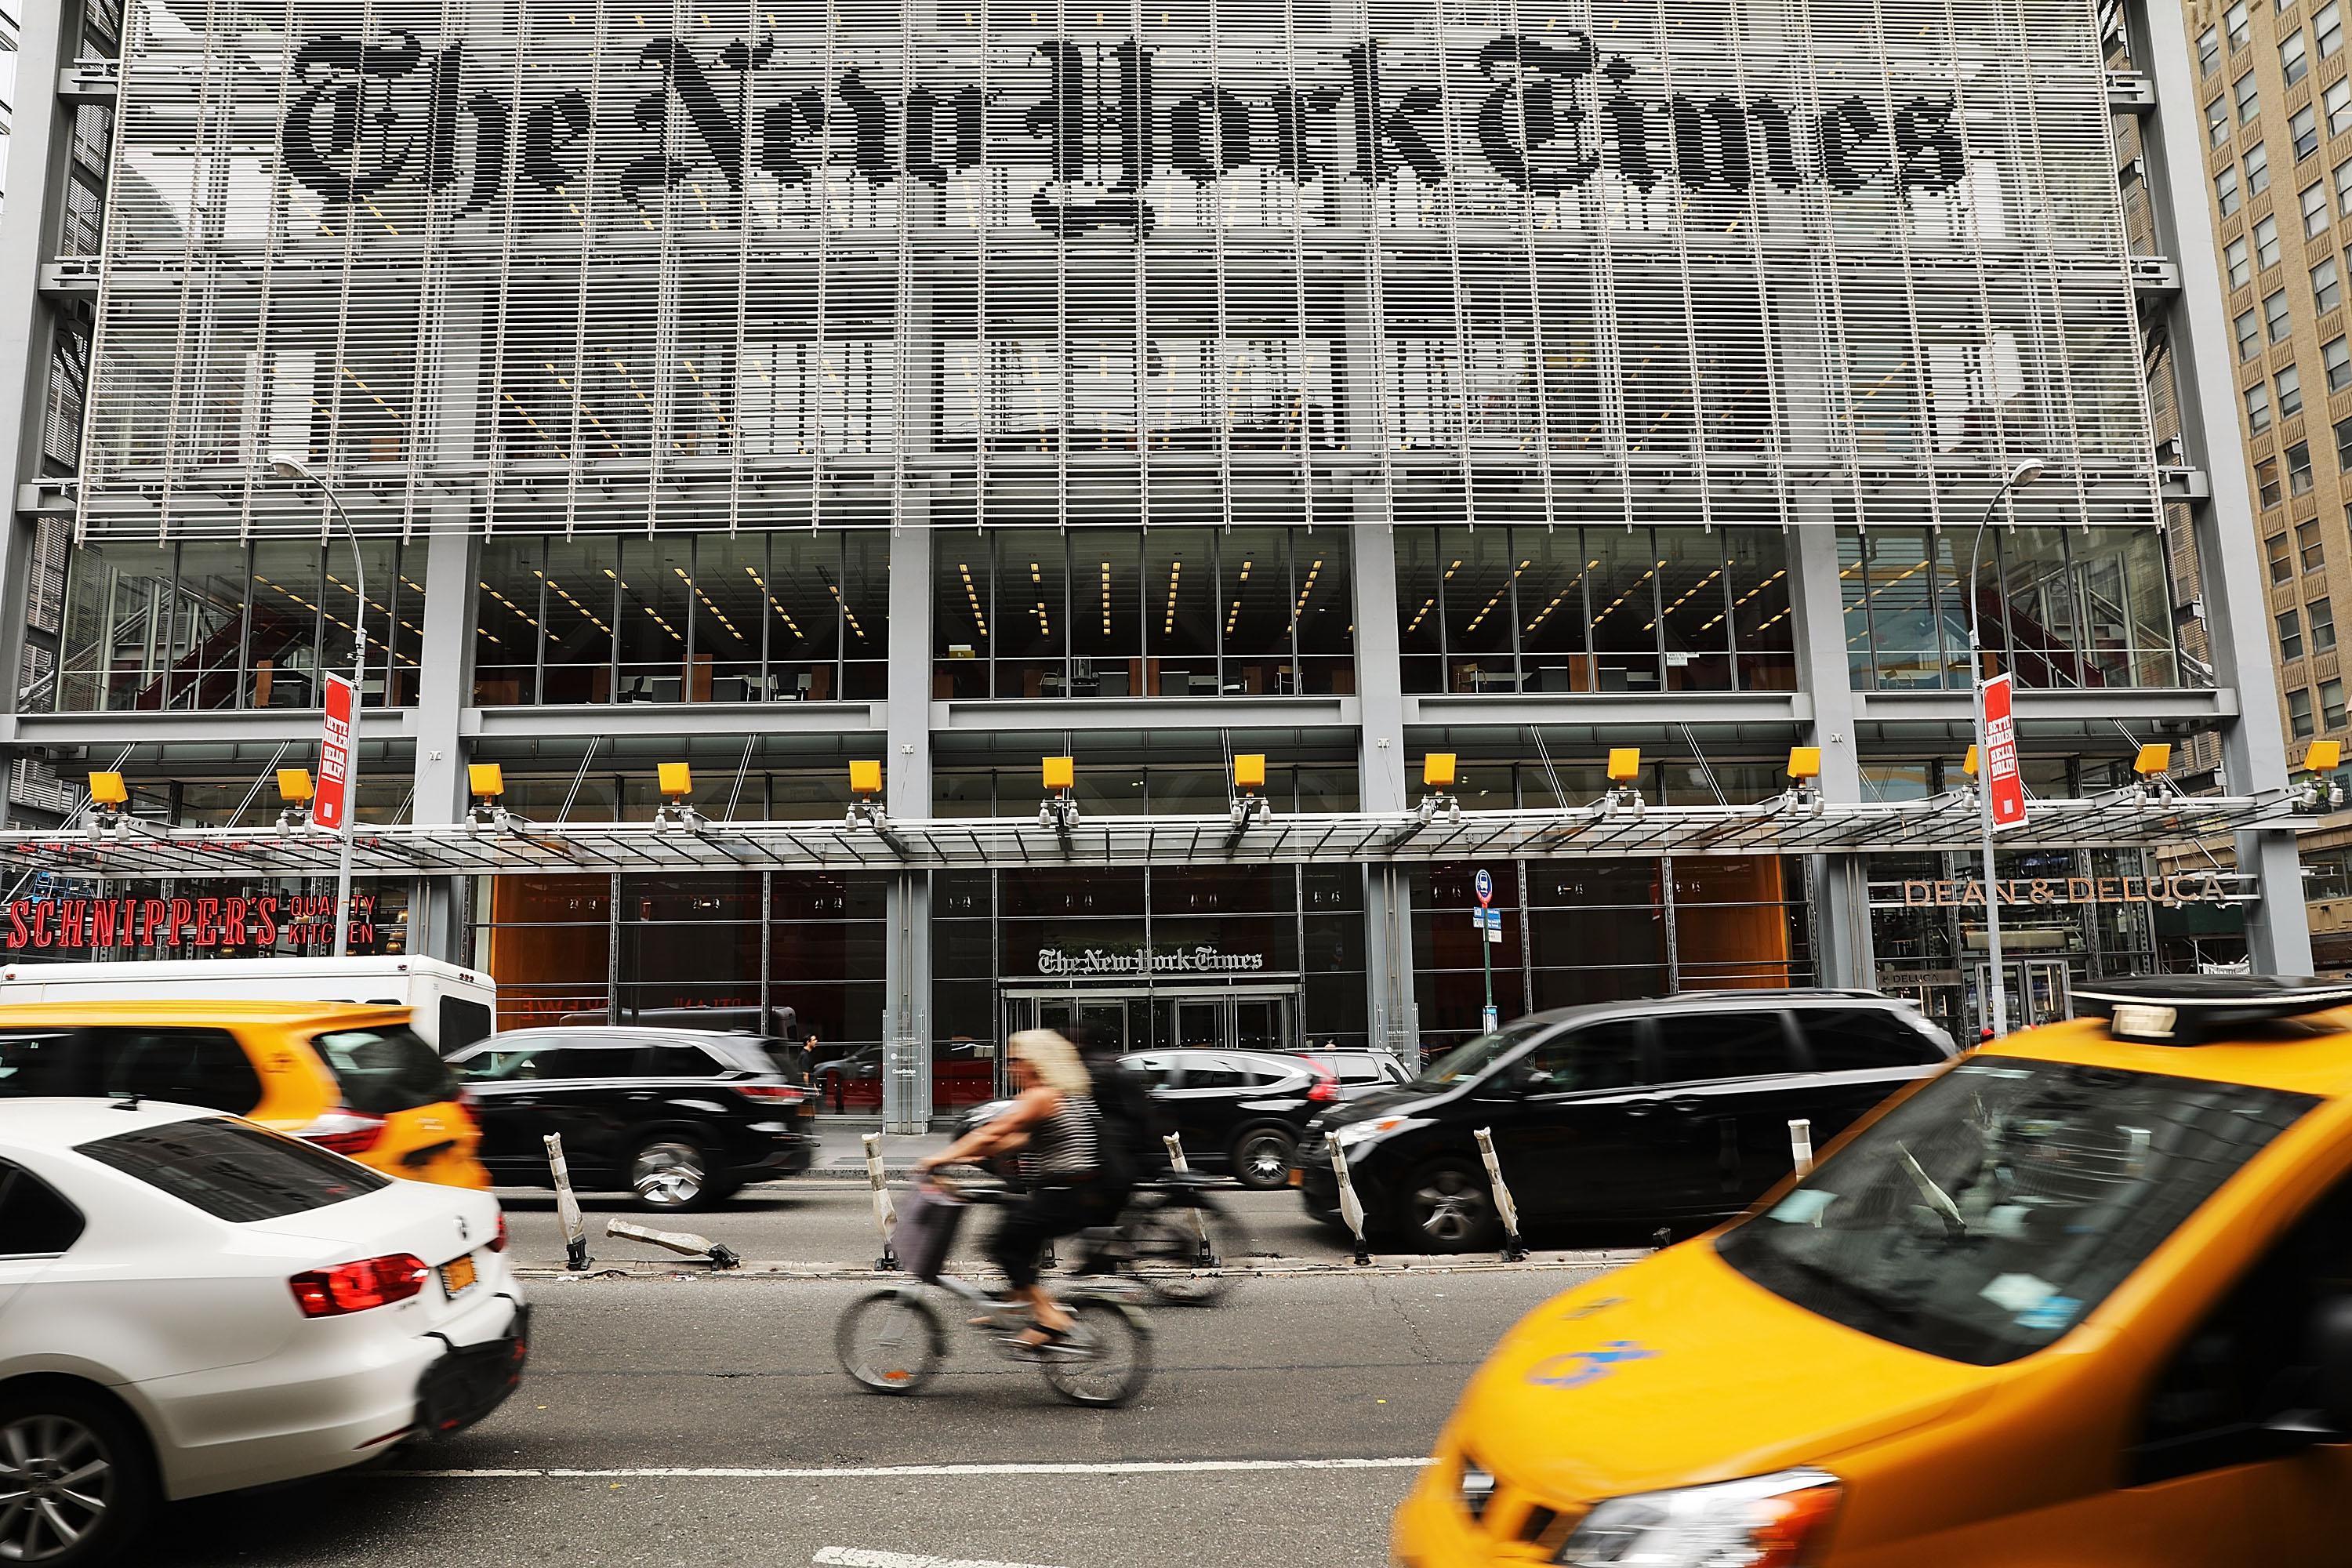 NEW YORK, NY - JULY 27:  The New York Times building stands in Manhattan on July 27, 2017 in New York City.  The New York Times Company shares have surged to a nine-year high after posting strong earnings on Thursday. Partly due to new digital subscriptions following the election of Donald Trump as president, the company reported a profit of $27.7 million in the second quarter, up from $9.1 million in the same period last year.  (Photo by Spencer Platt/Getty Images)